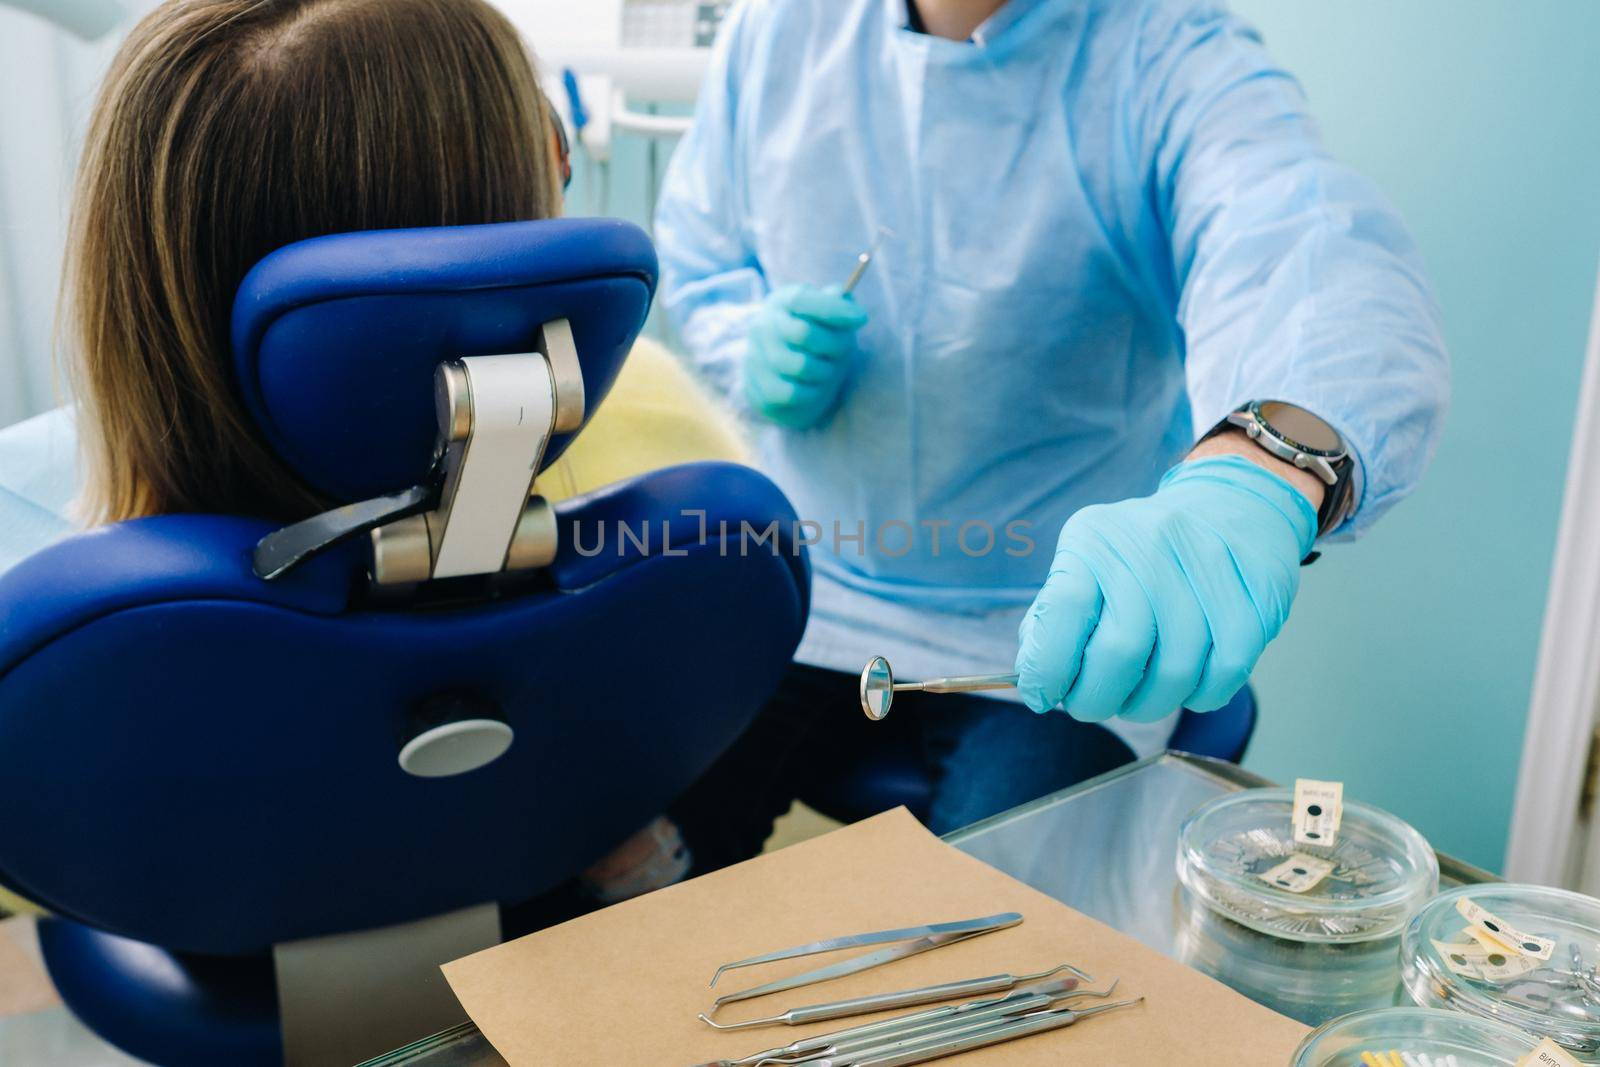 The dentist takes the tools to treat the patient's teeth.